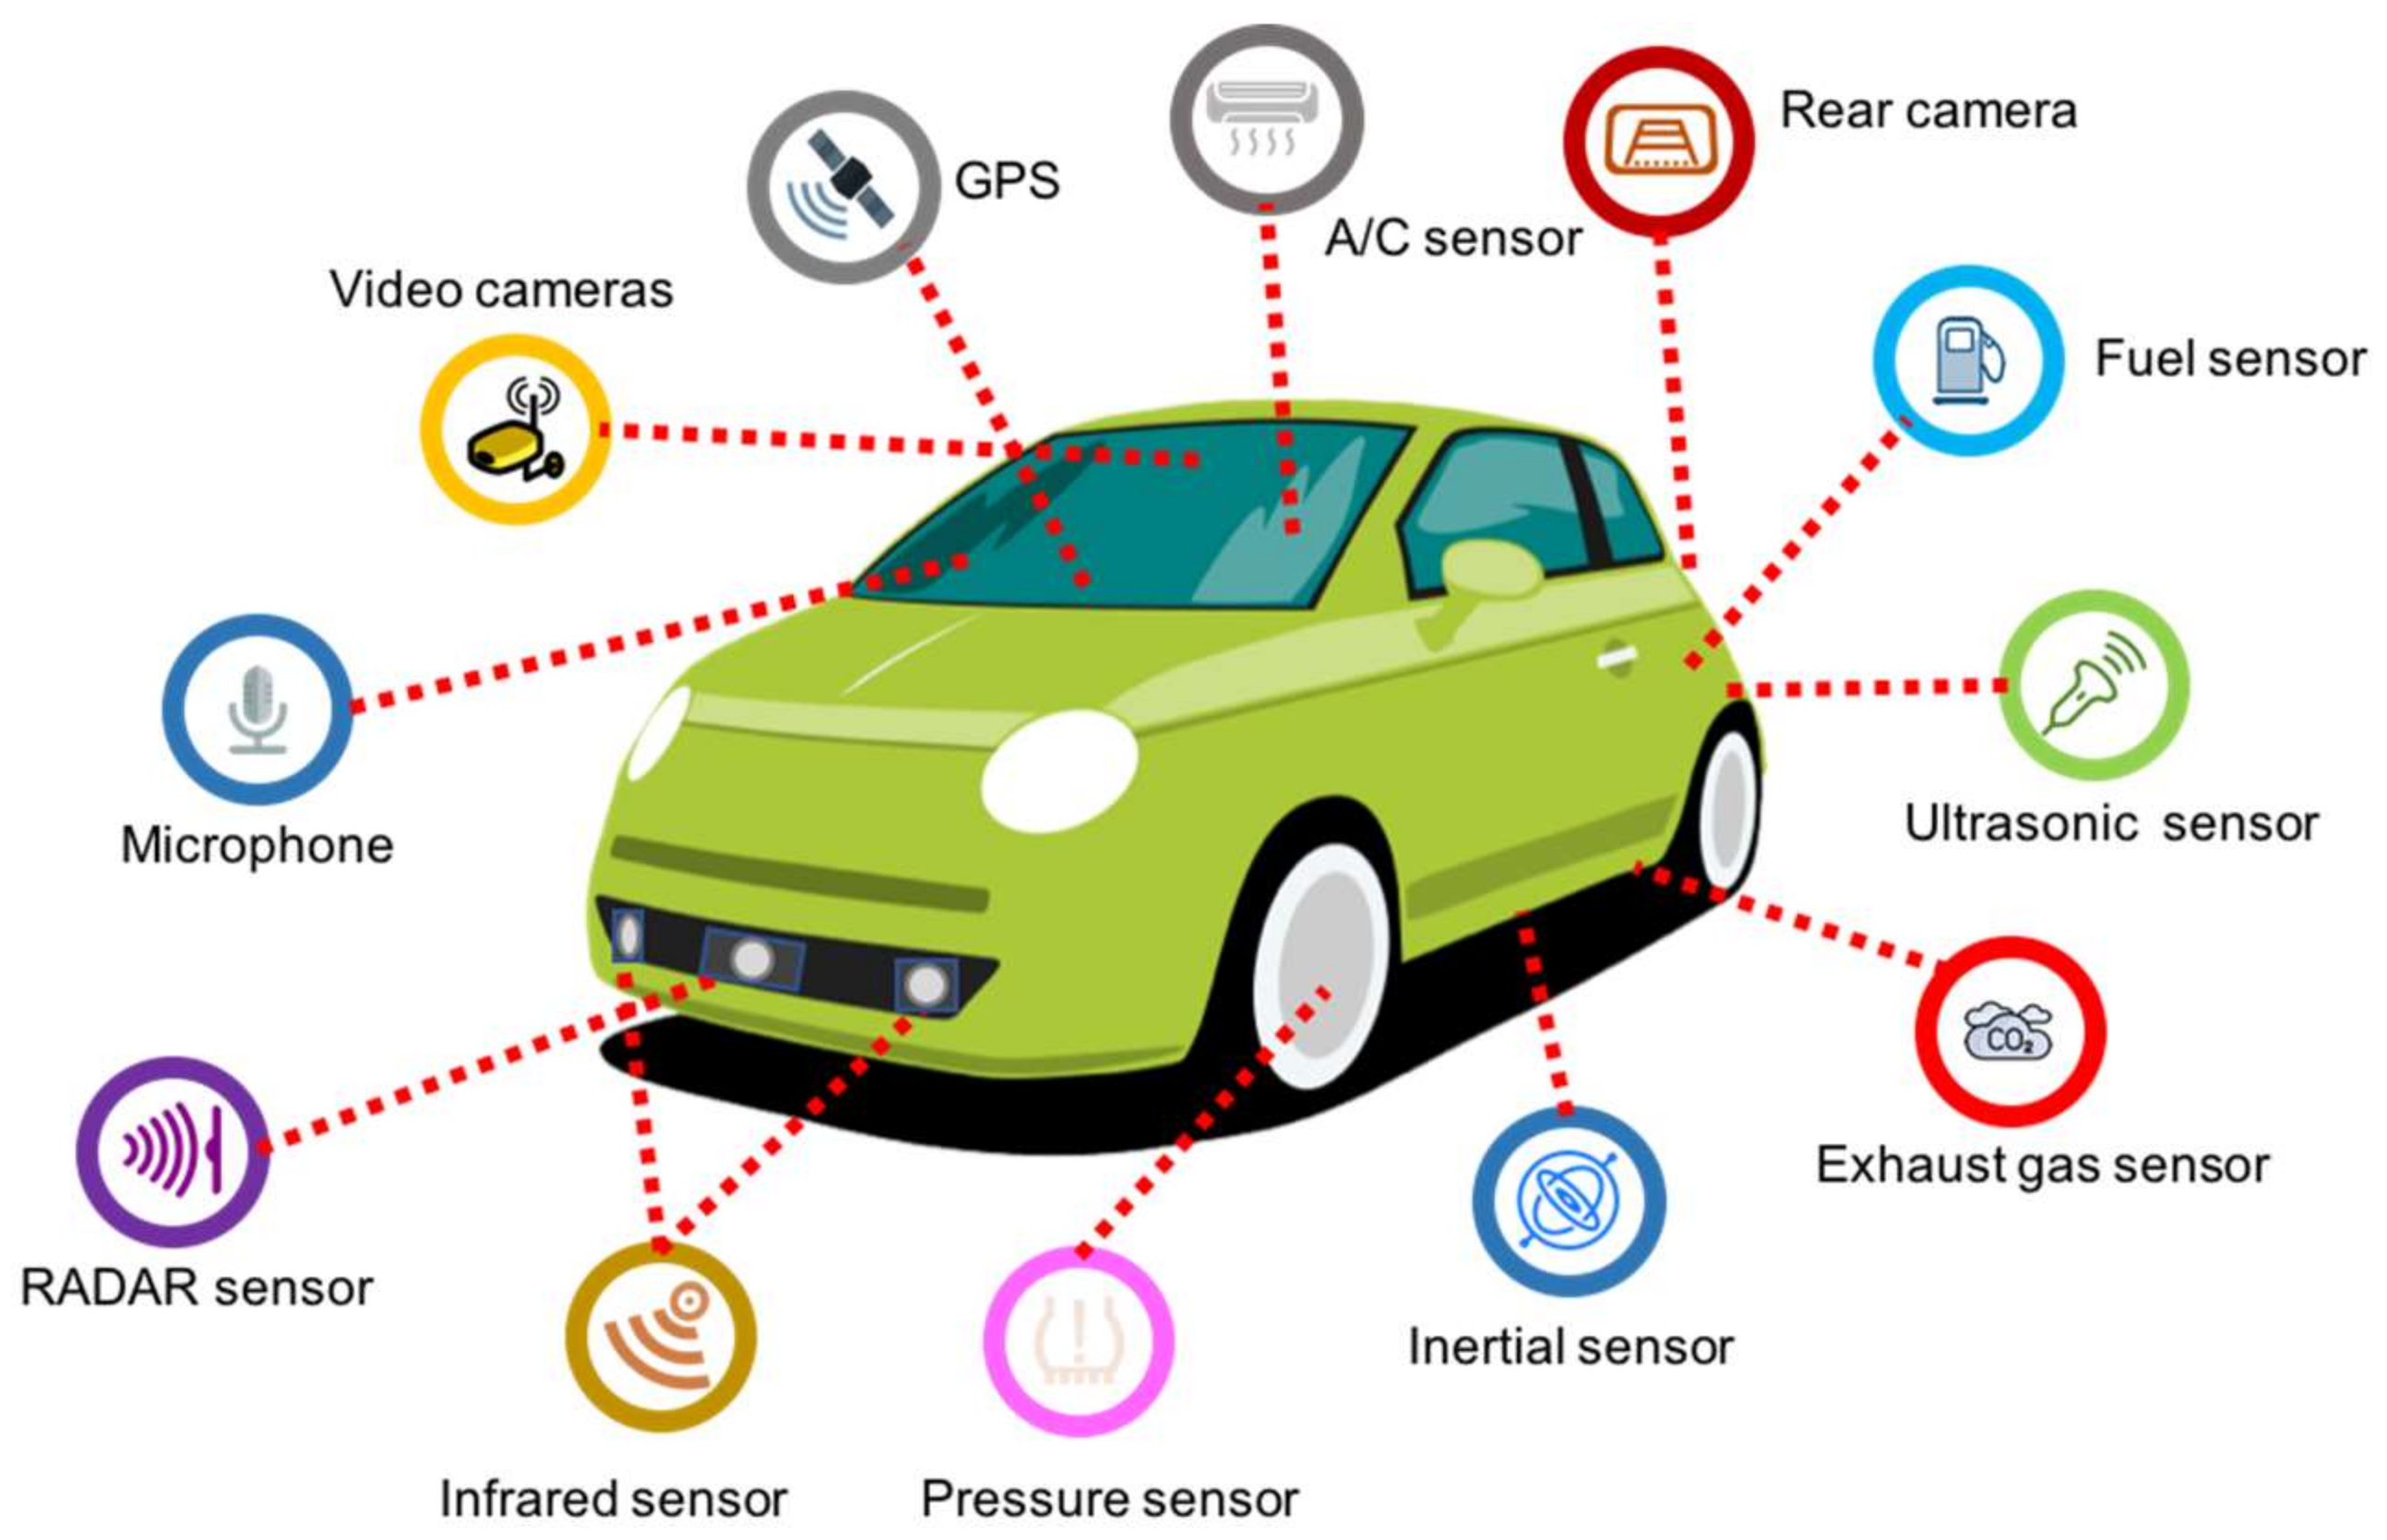 Advantages and Disadvantages of Using Sensors in Smart Cars